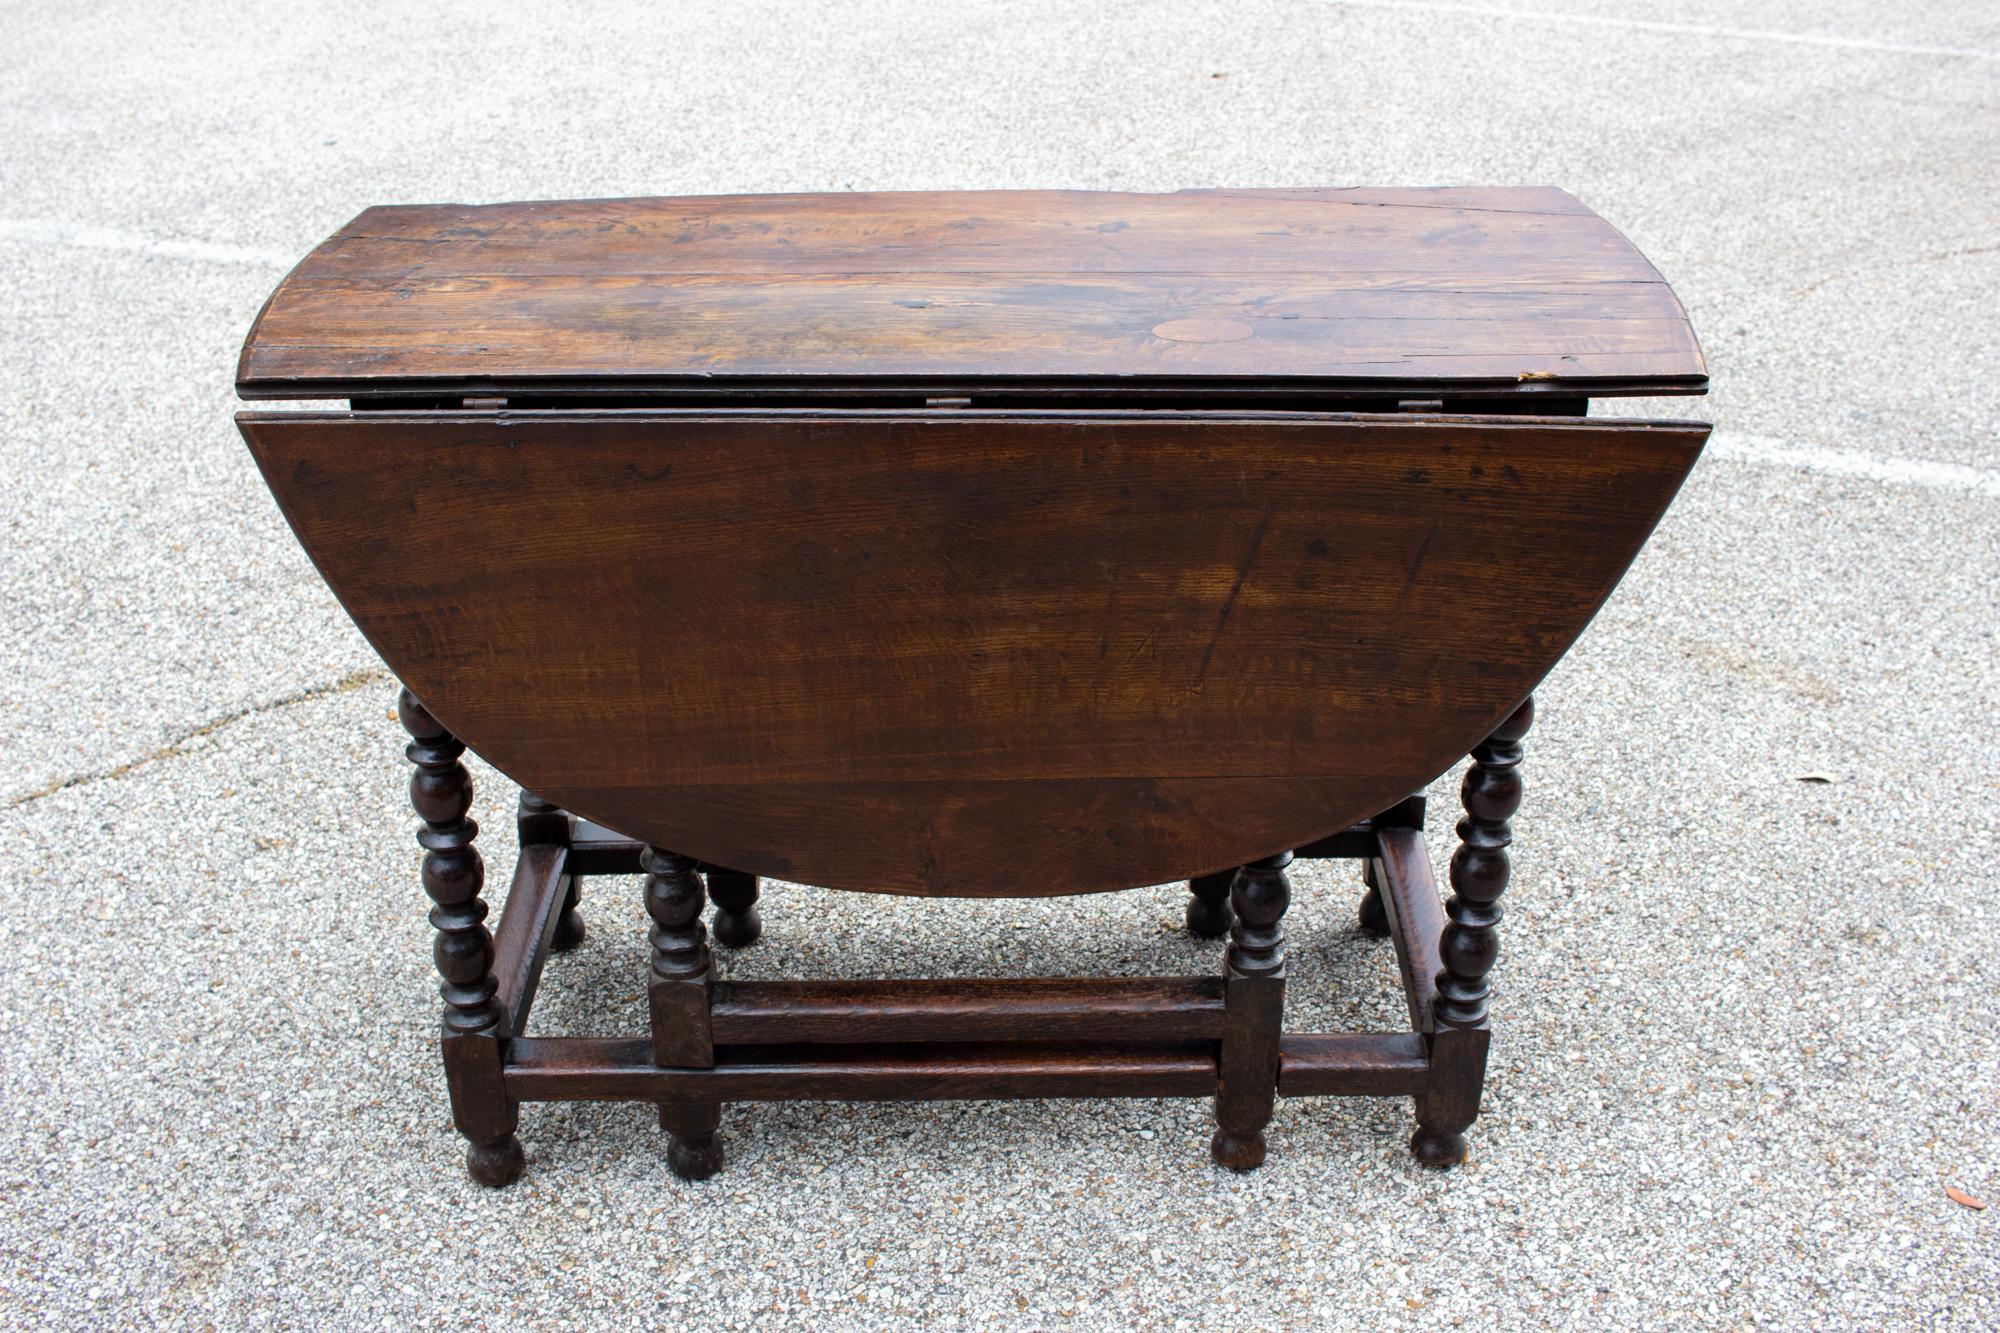 French 19th Century Oak Drop Leaf Gate Leg Table and Console with Drawer, circa 1840